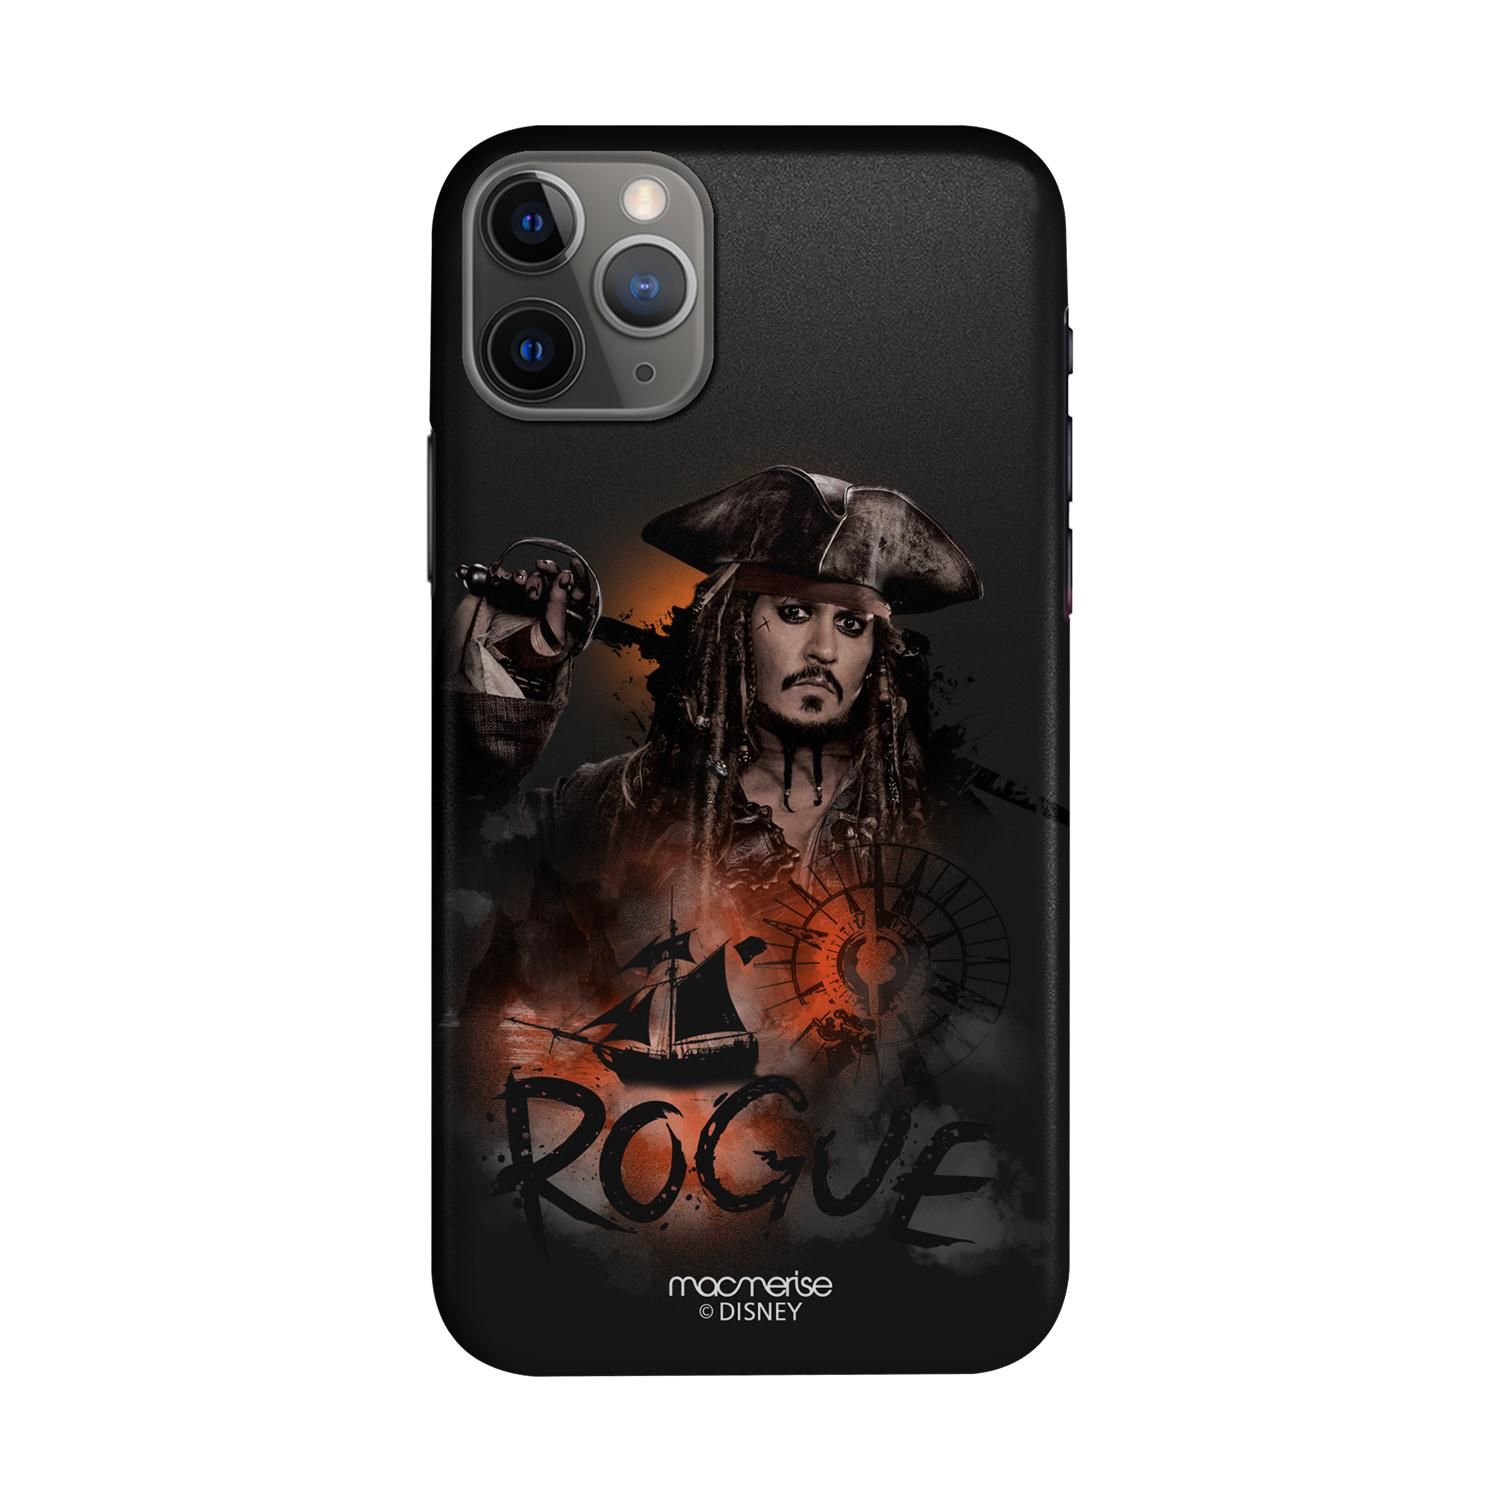 Rogue Jack - Sleek Phone Case for iPhone 11 Pro Max